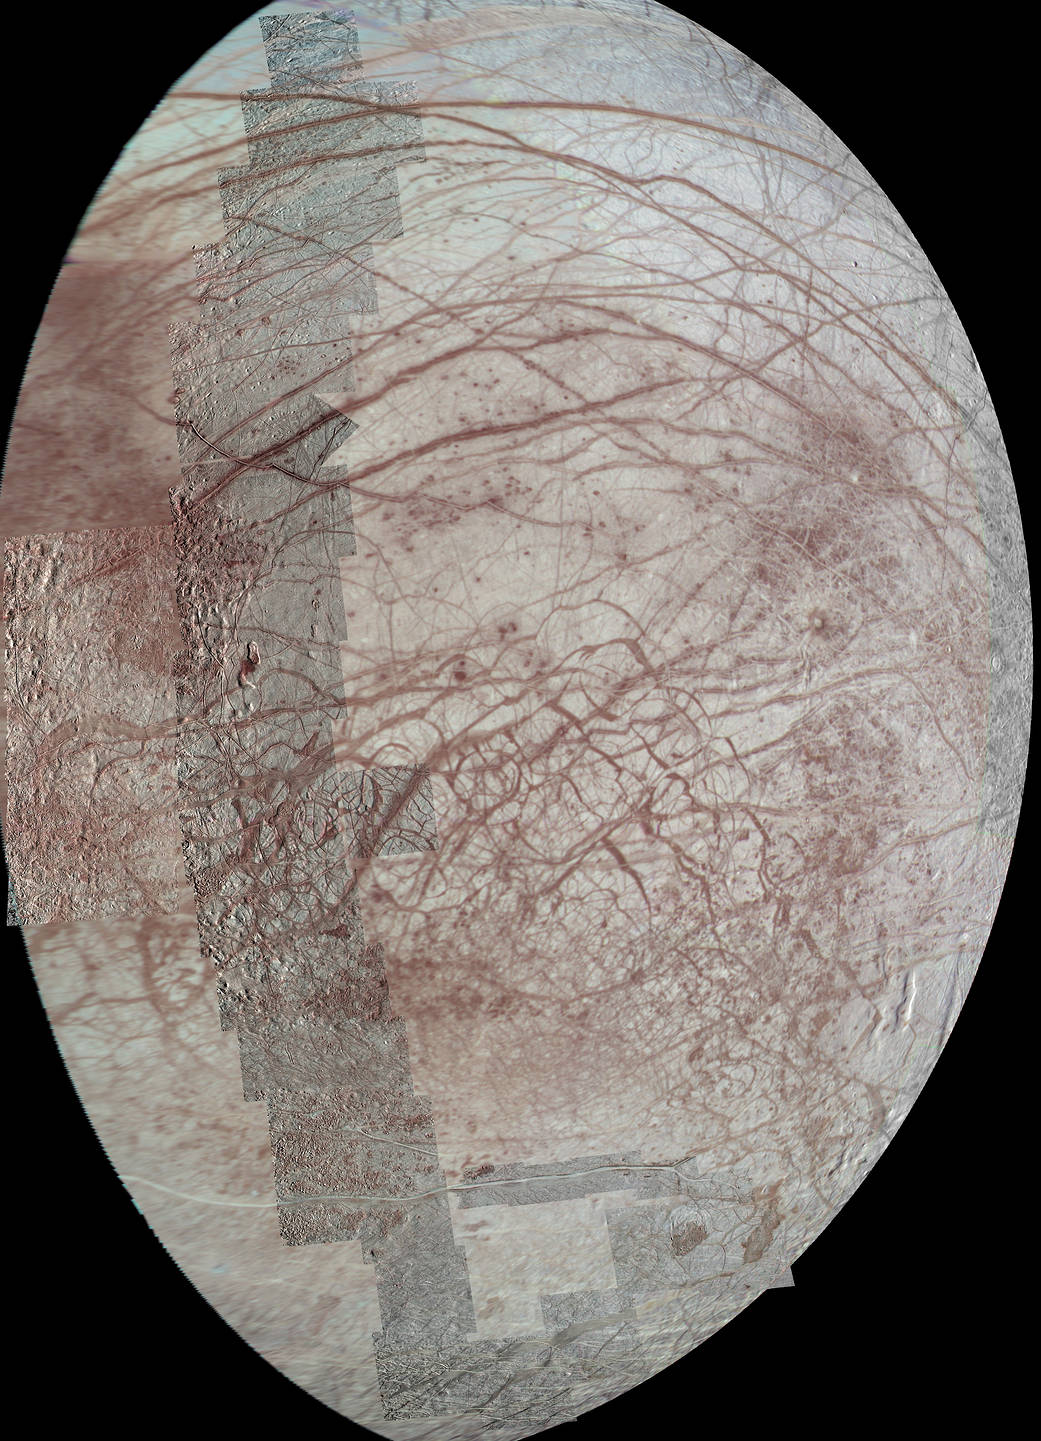 Repeated Flybys Yield a Pole-to-Pole View of Europa